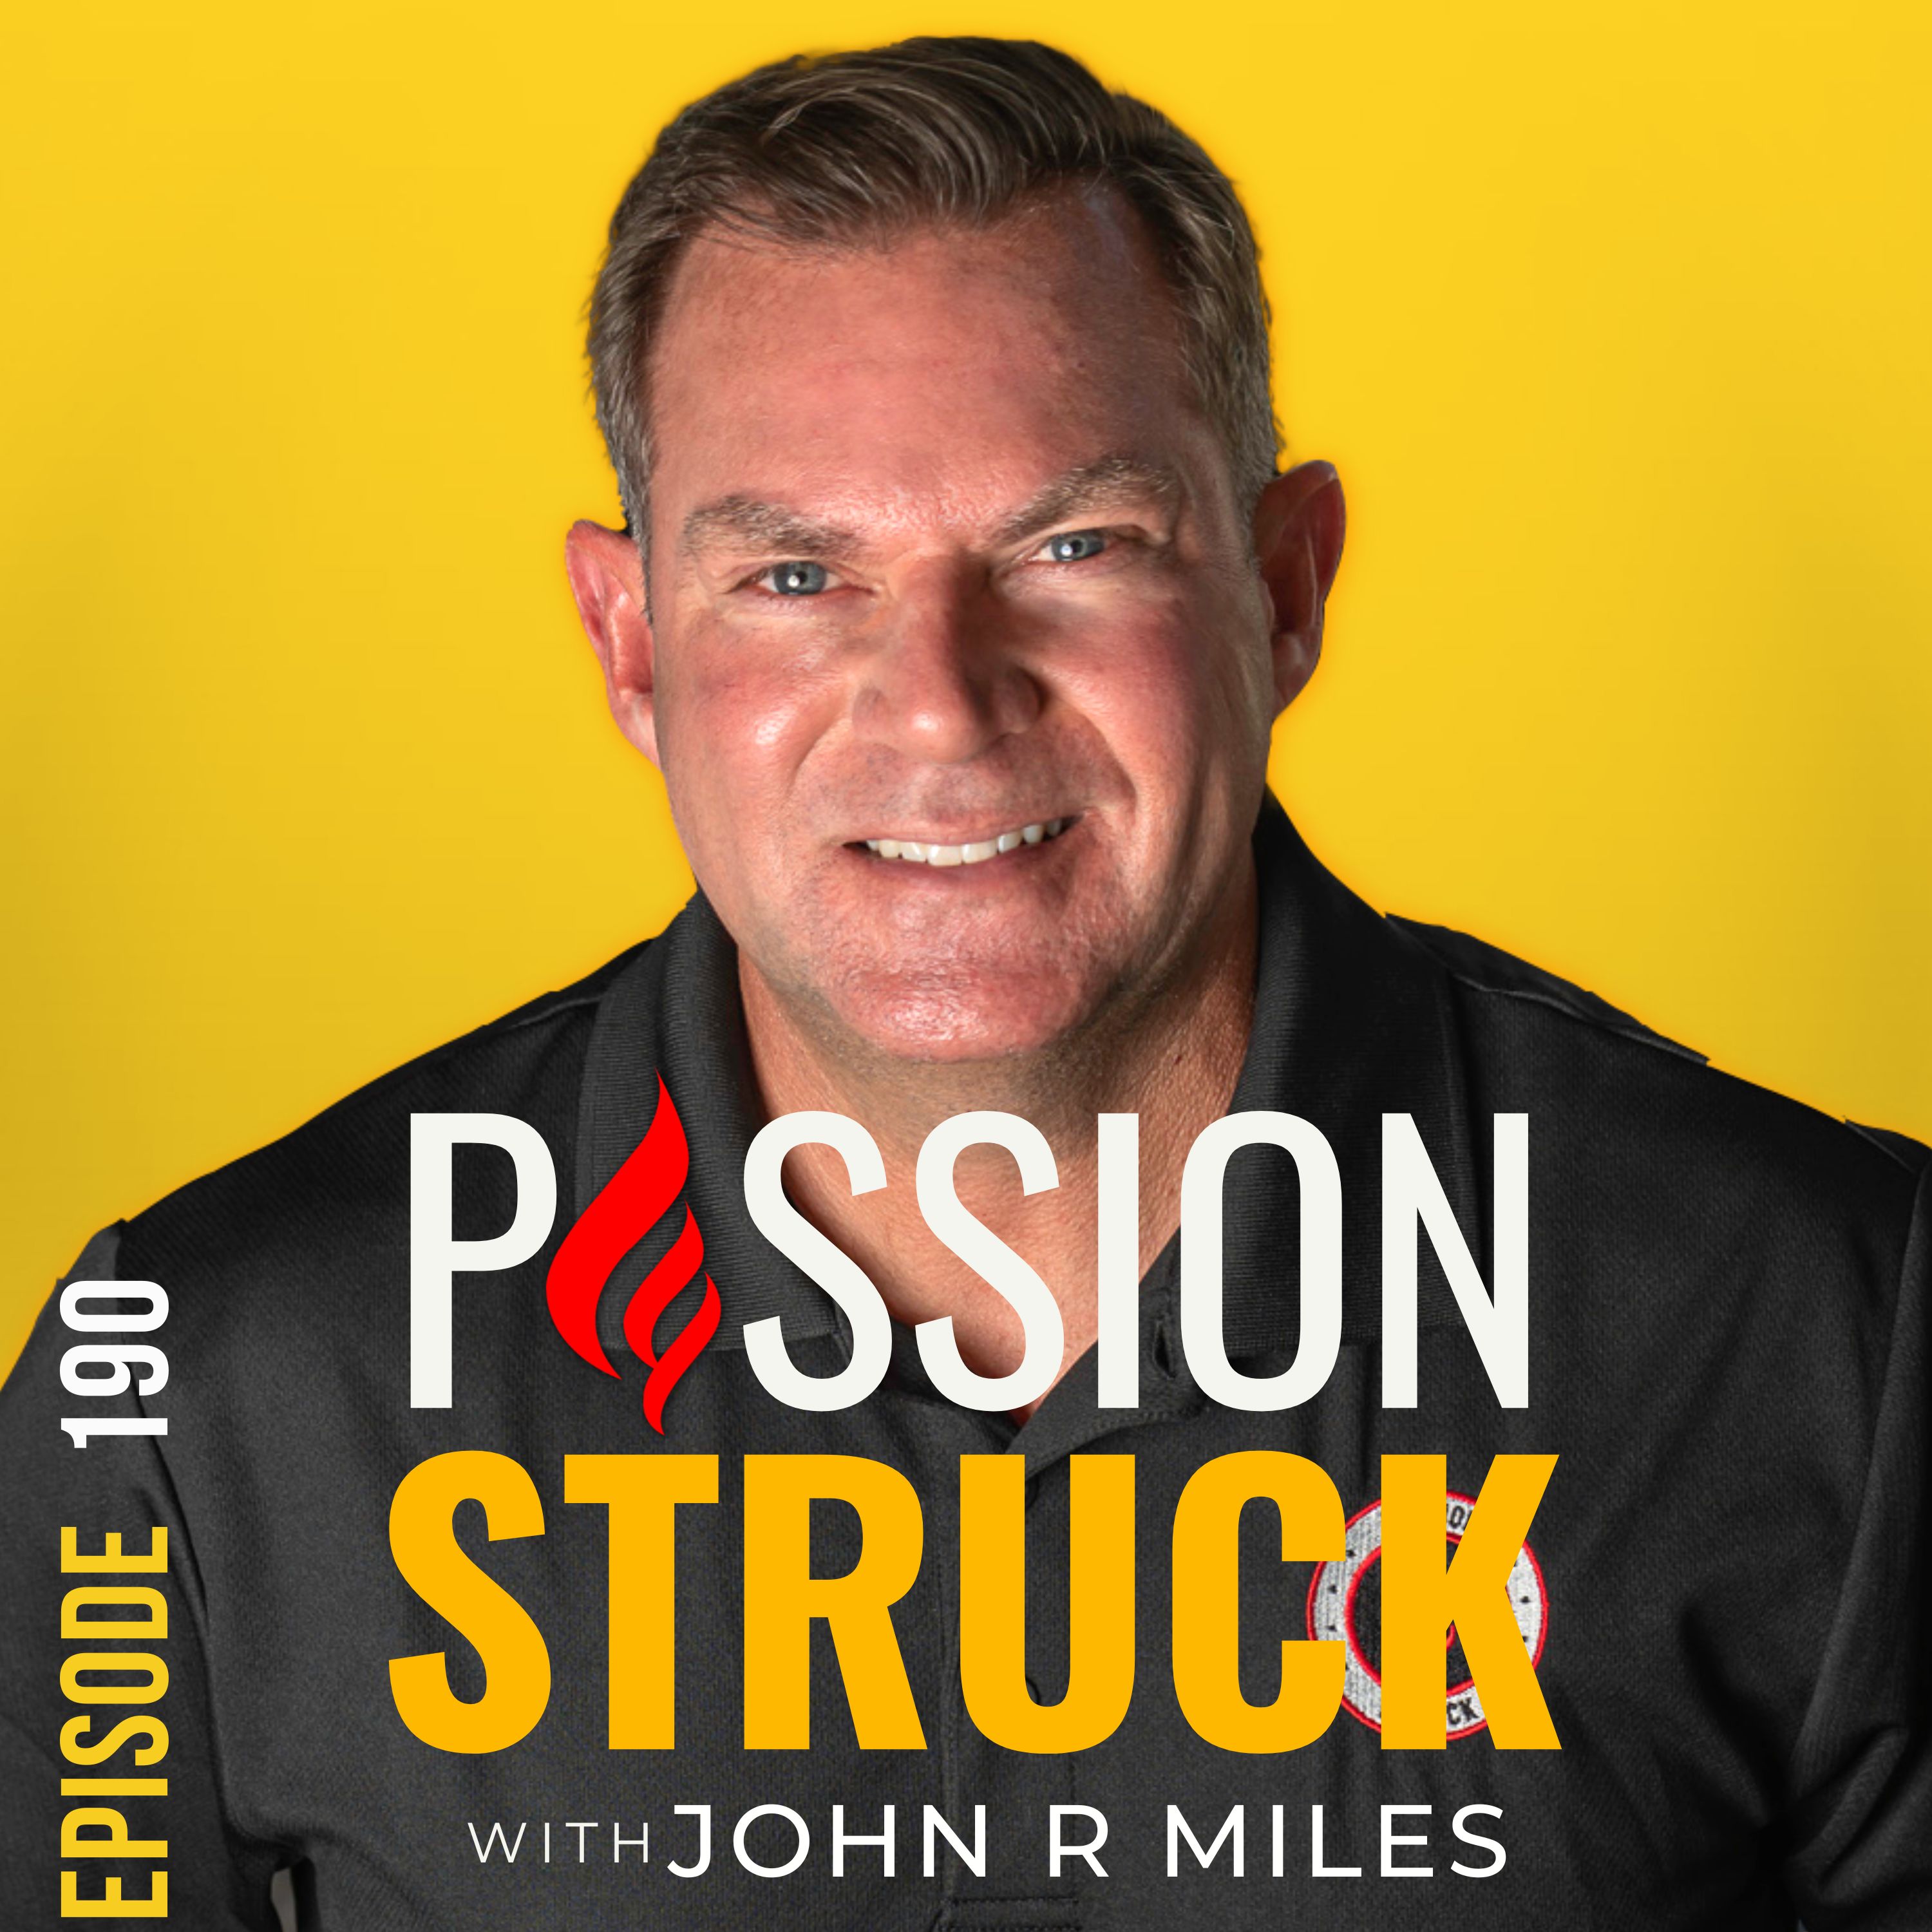 Passion Struck with John R. Miles thumbnail episode 190 on free will